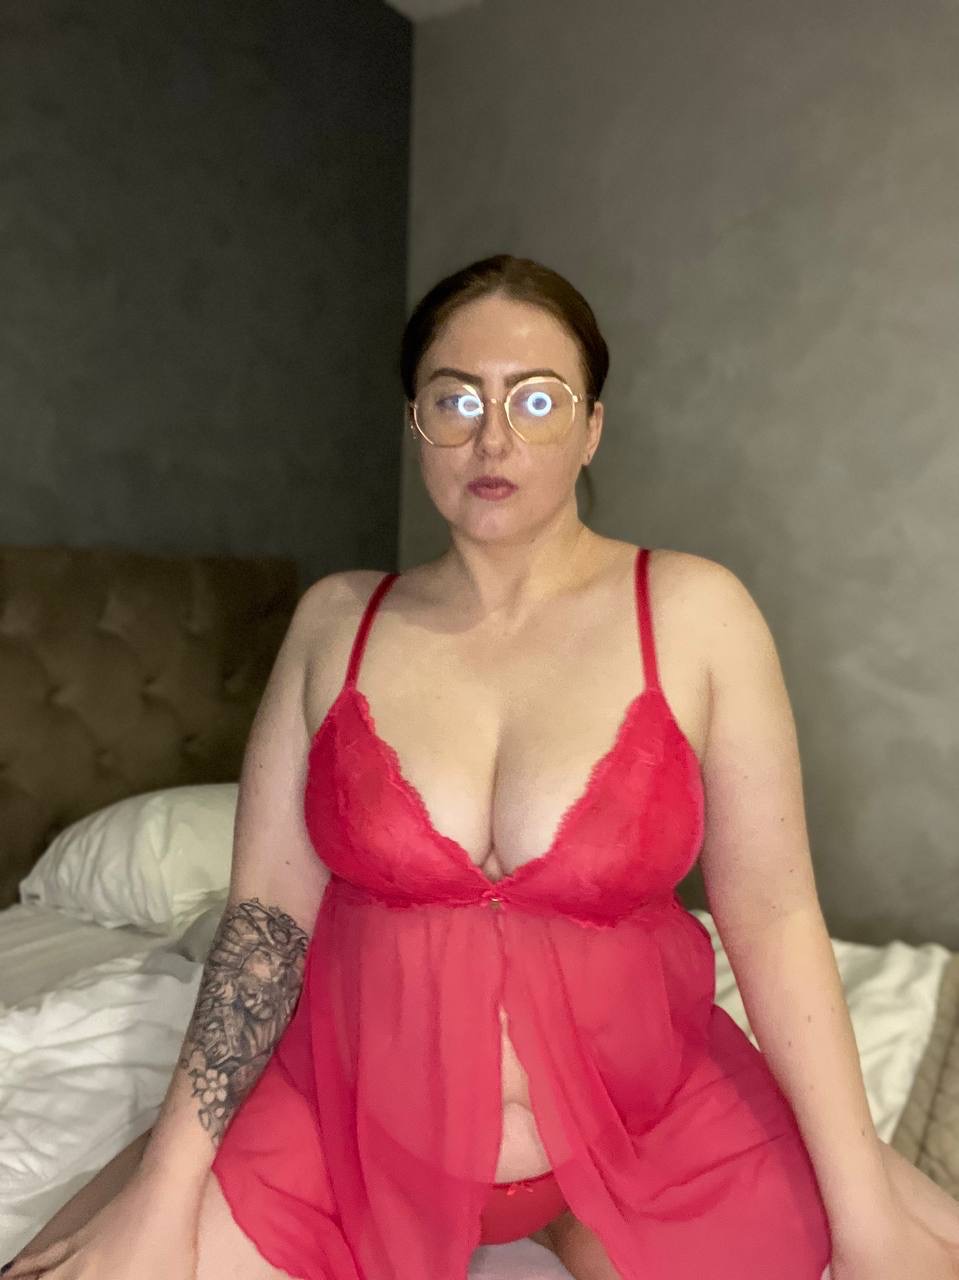 Onlyfans Fatty Kristi Kkk Poses In Her Lingerie Shows Her Big Tits Fat Ass